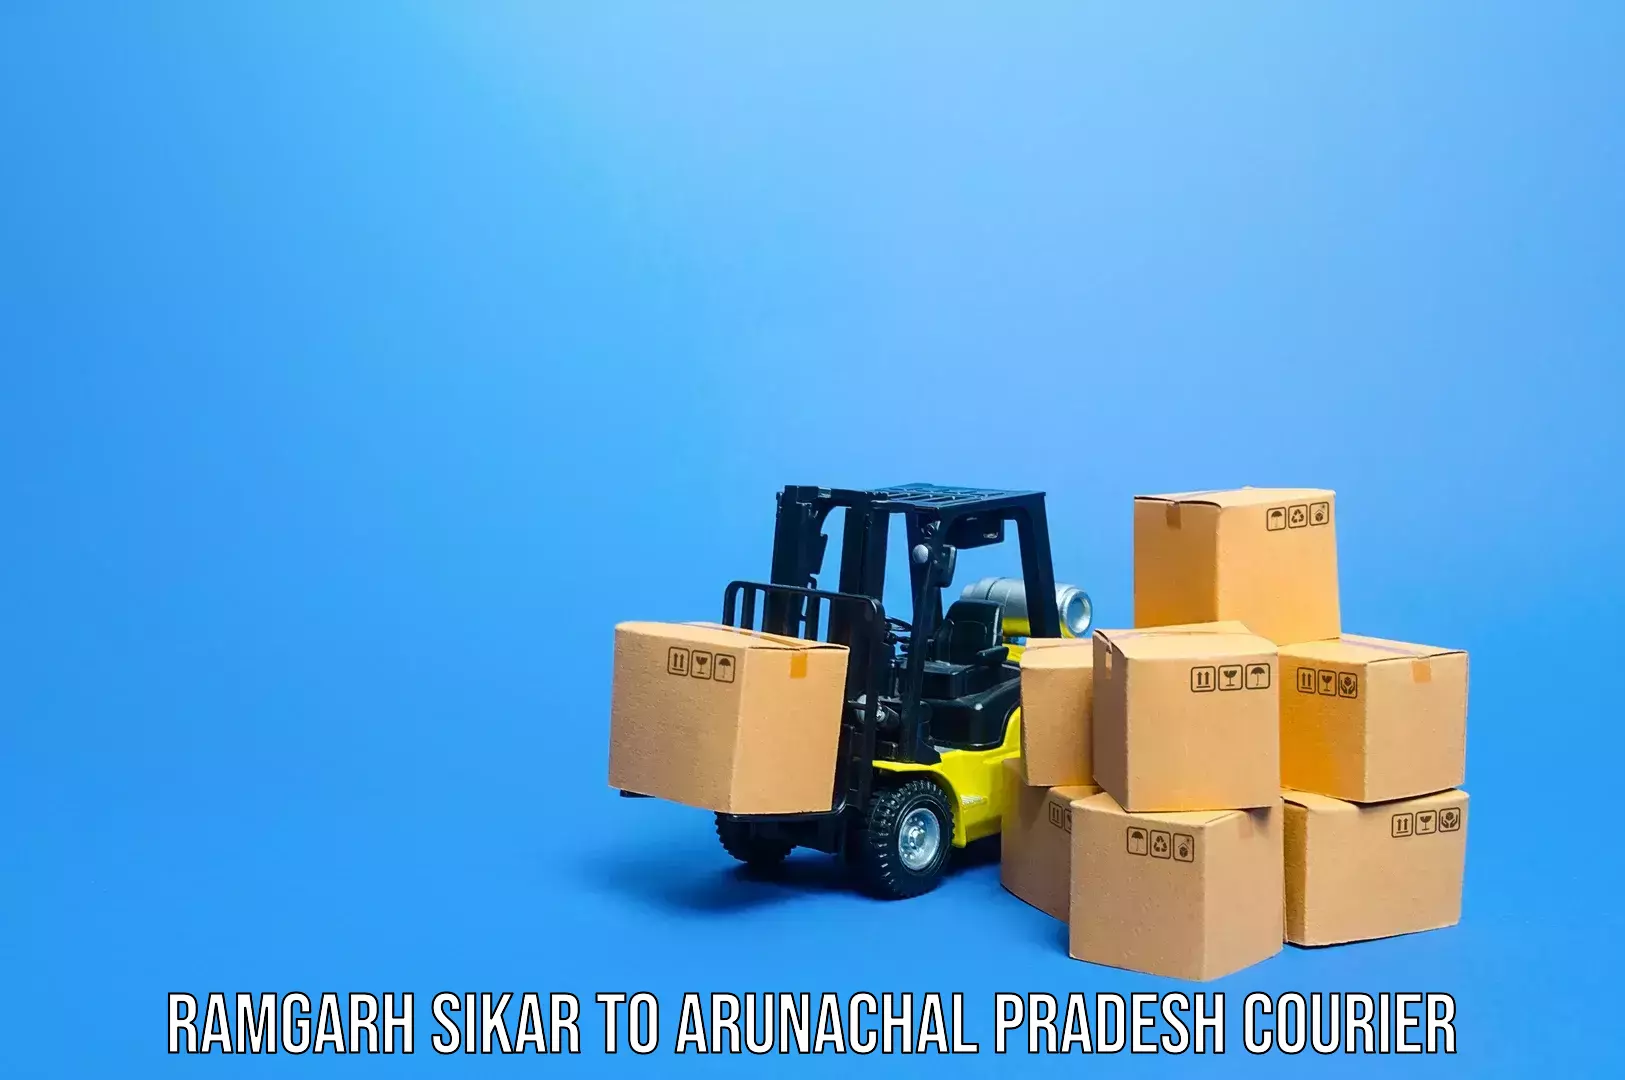 Luggage transport consultancy Ramgarh Sikar to Lohit